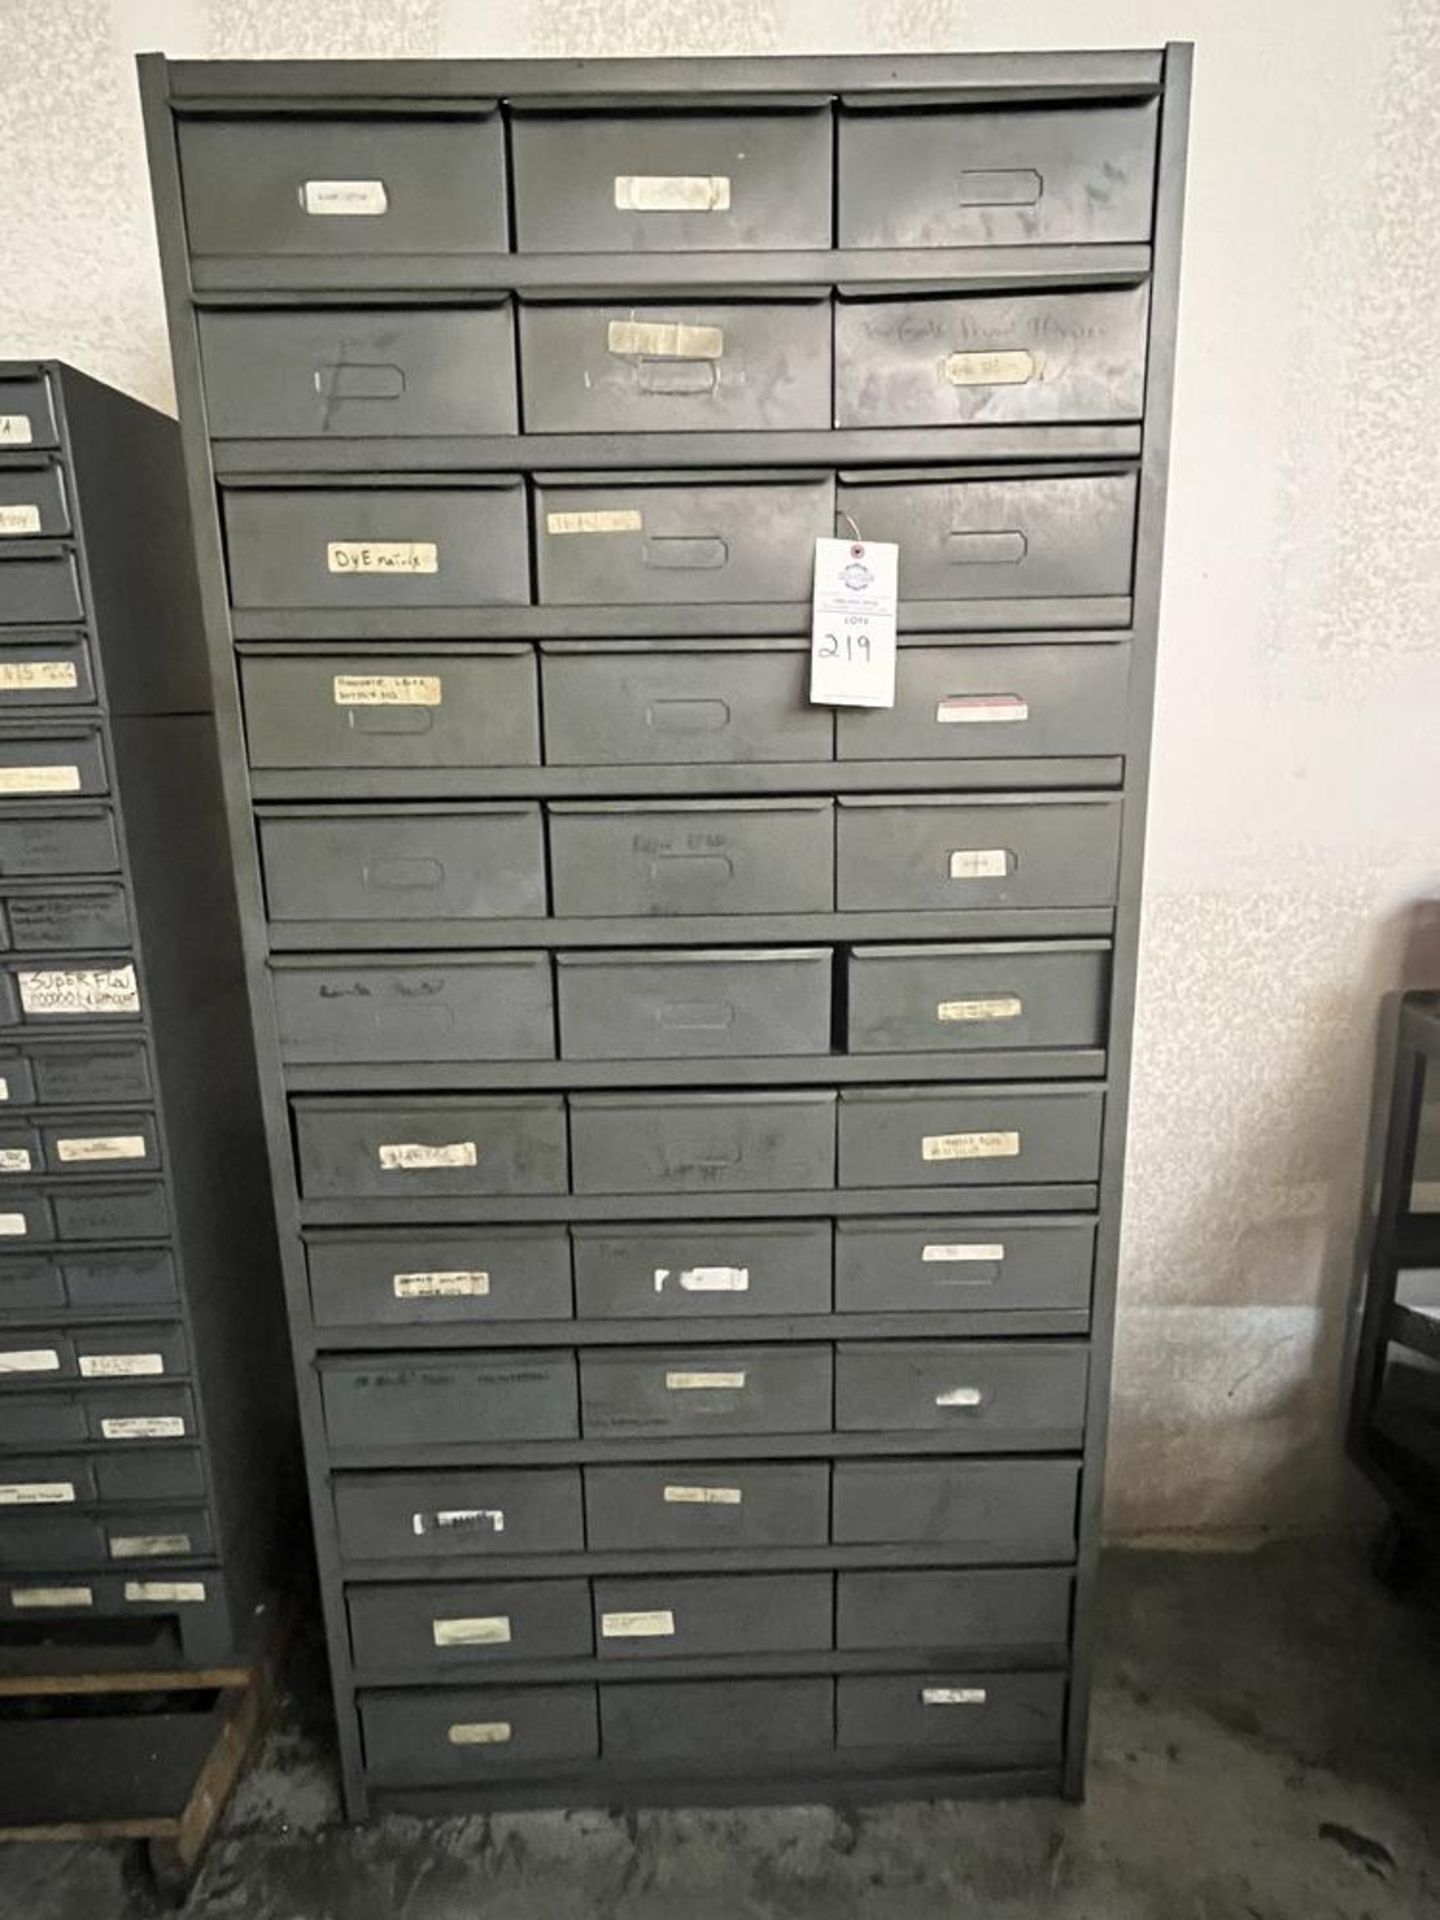 36 Drawer Industrial Cabinet